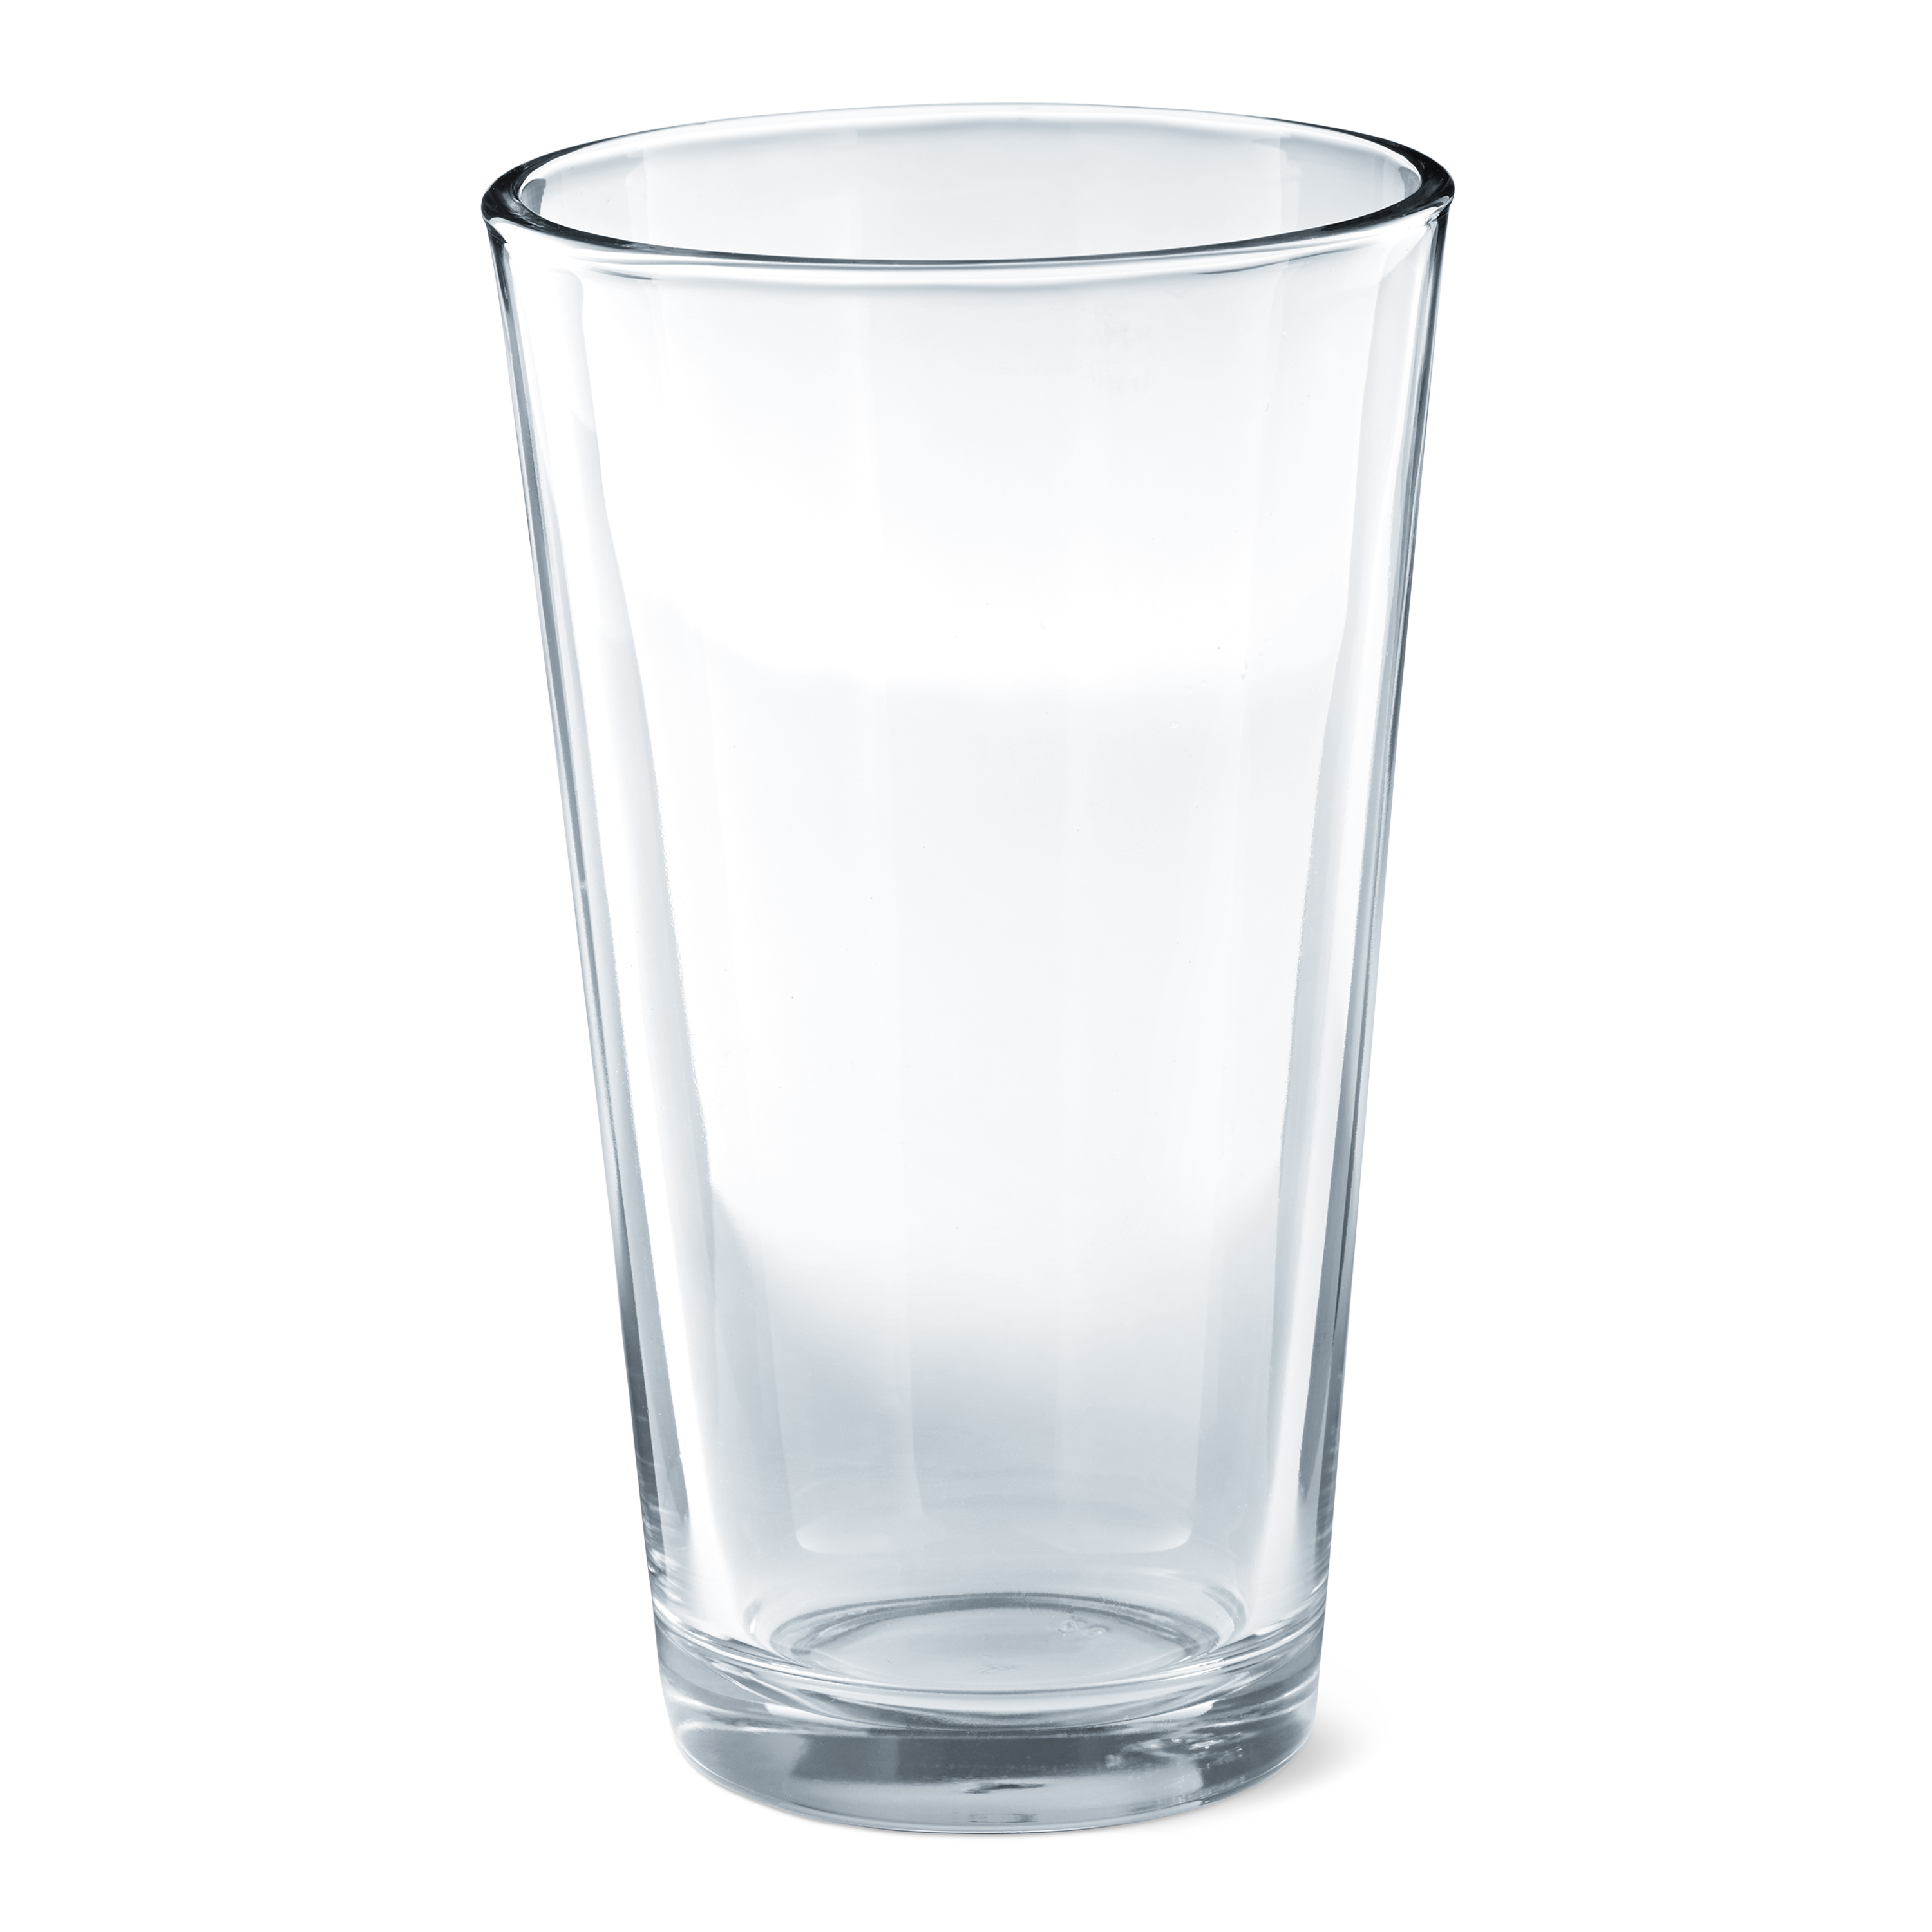 Mainstays 16-Ounce All-Purpose Cooler Glasses, Set of 12 - image 4 of 4